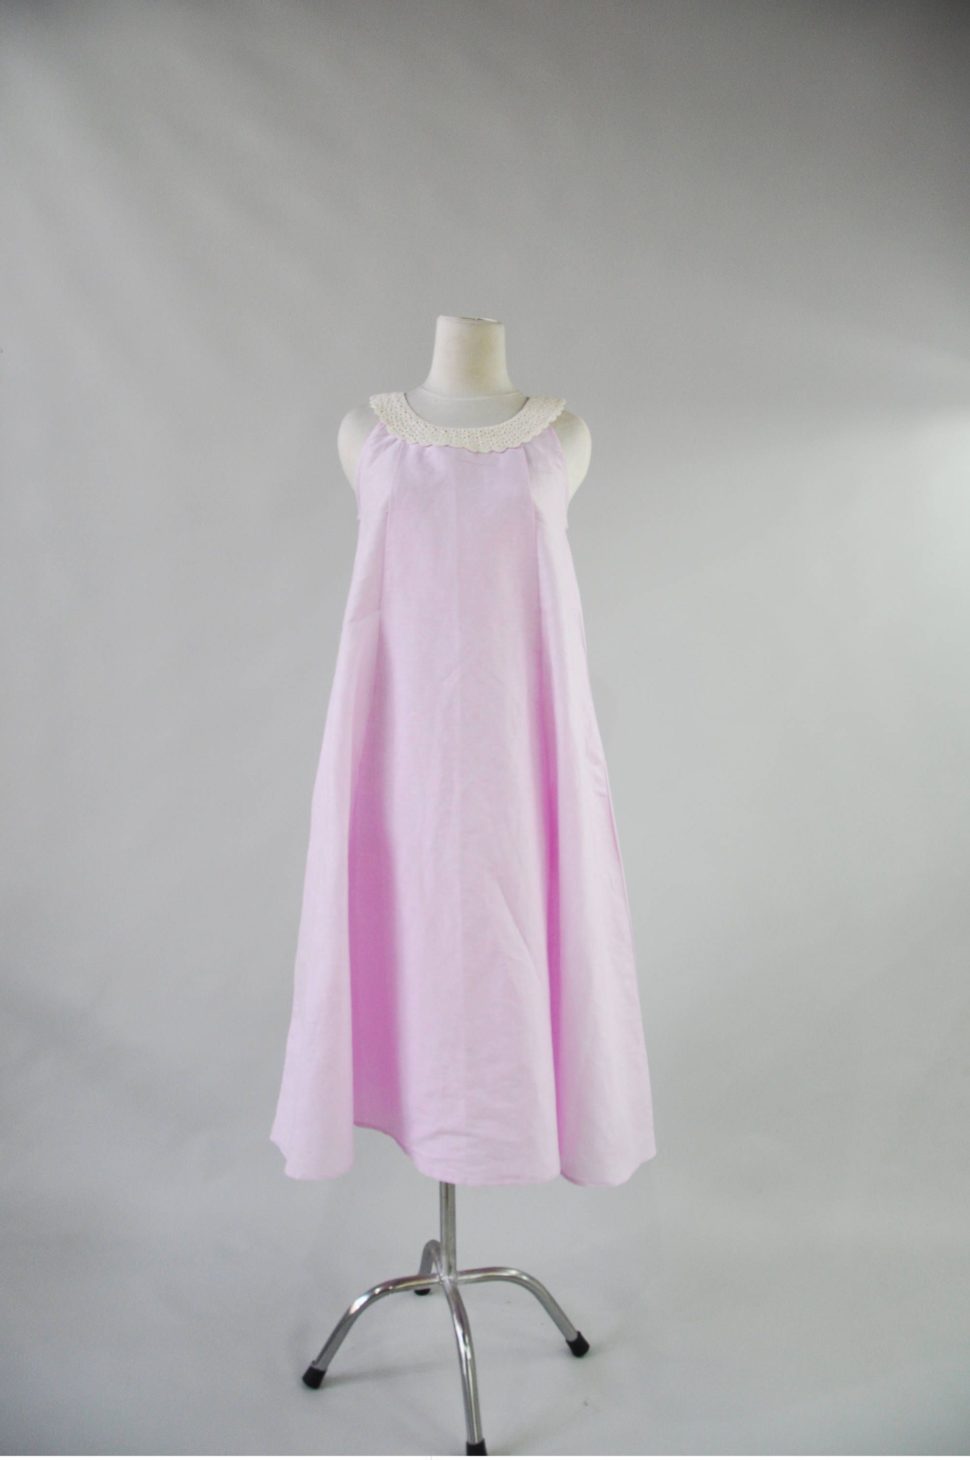 Medium Size of Baby Shower:pink Maternity Dress Maternity Gowns For Photography Maternity Dresses For Baby Shower Mom And Dad Baby Shower Outfits Non Maternity Dresses For Baby Shower Celebrity Baby Shower Dresses White Maternity Dress For Baby Shower 2 Searches Left.